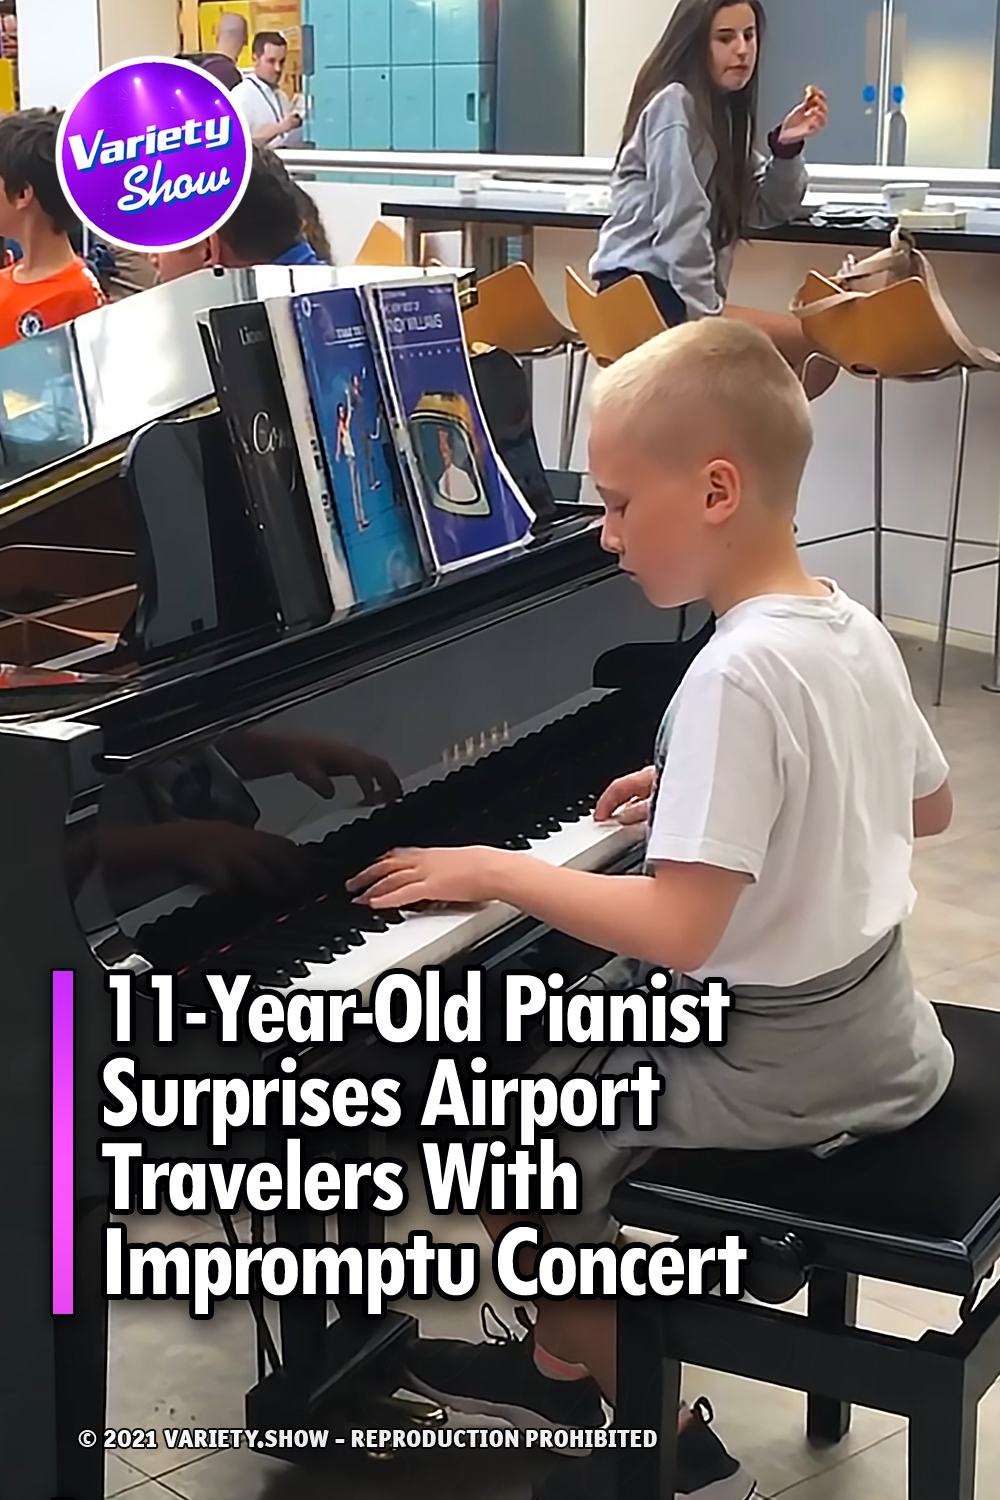 11-Year-Old Pianist Surprises Airport Travelers With Impromptu Concert